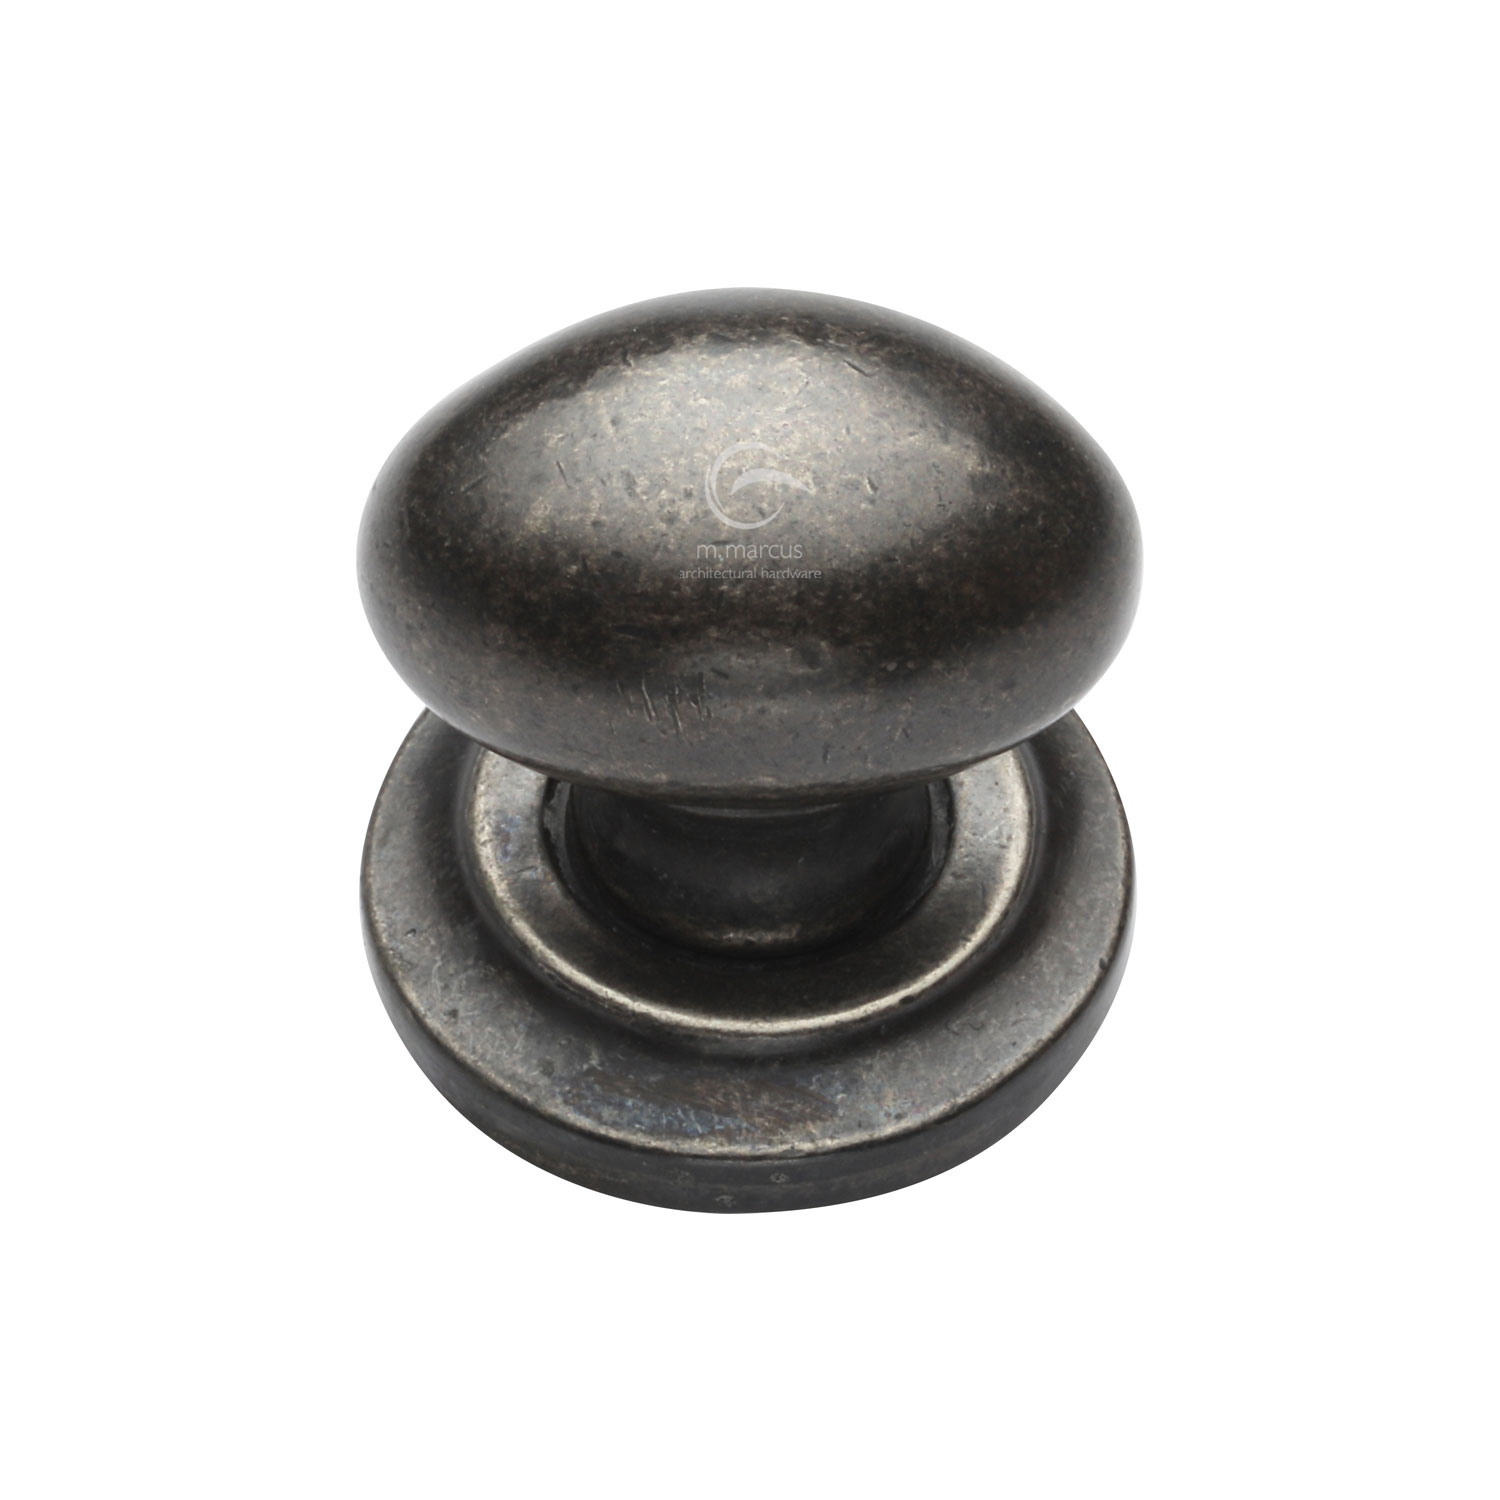 White Bronze Rustic Cabinet Knob on Plate Oval Design 32mm